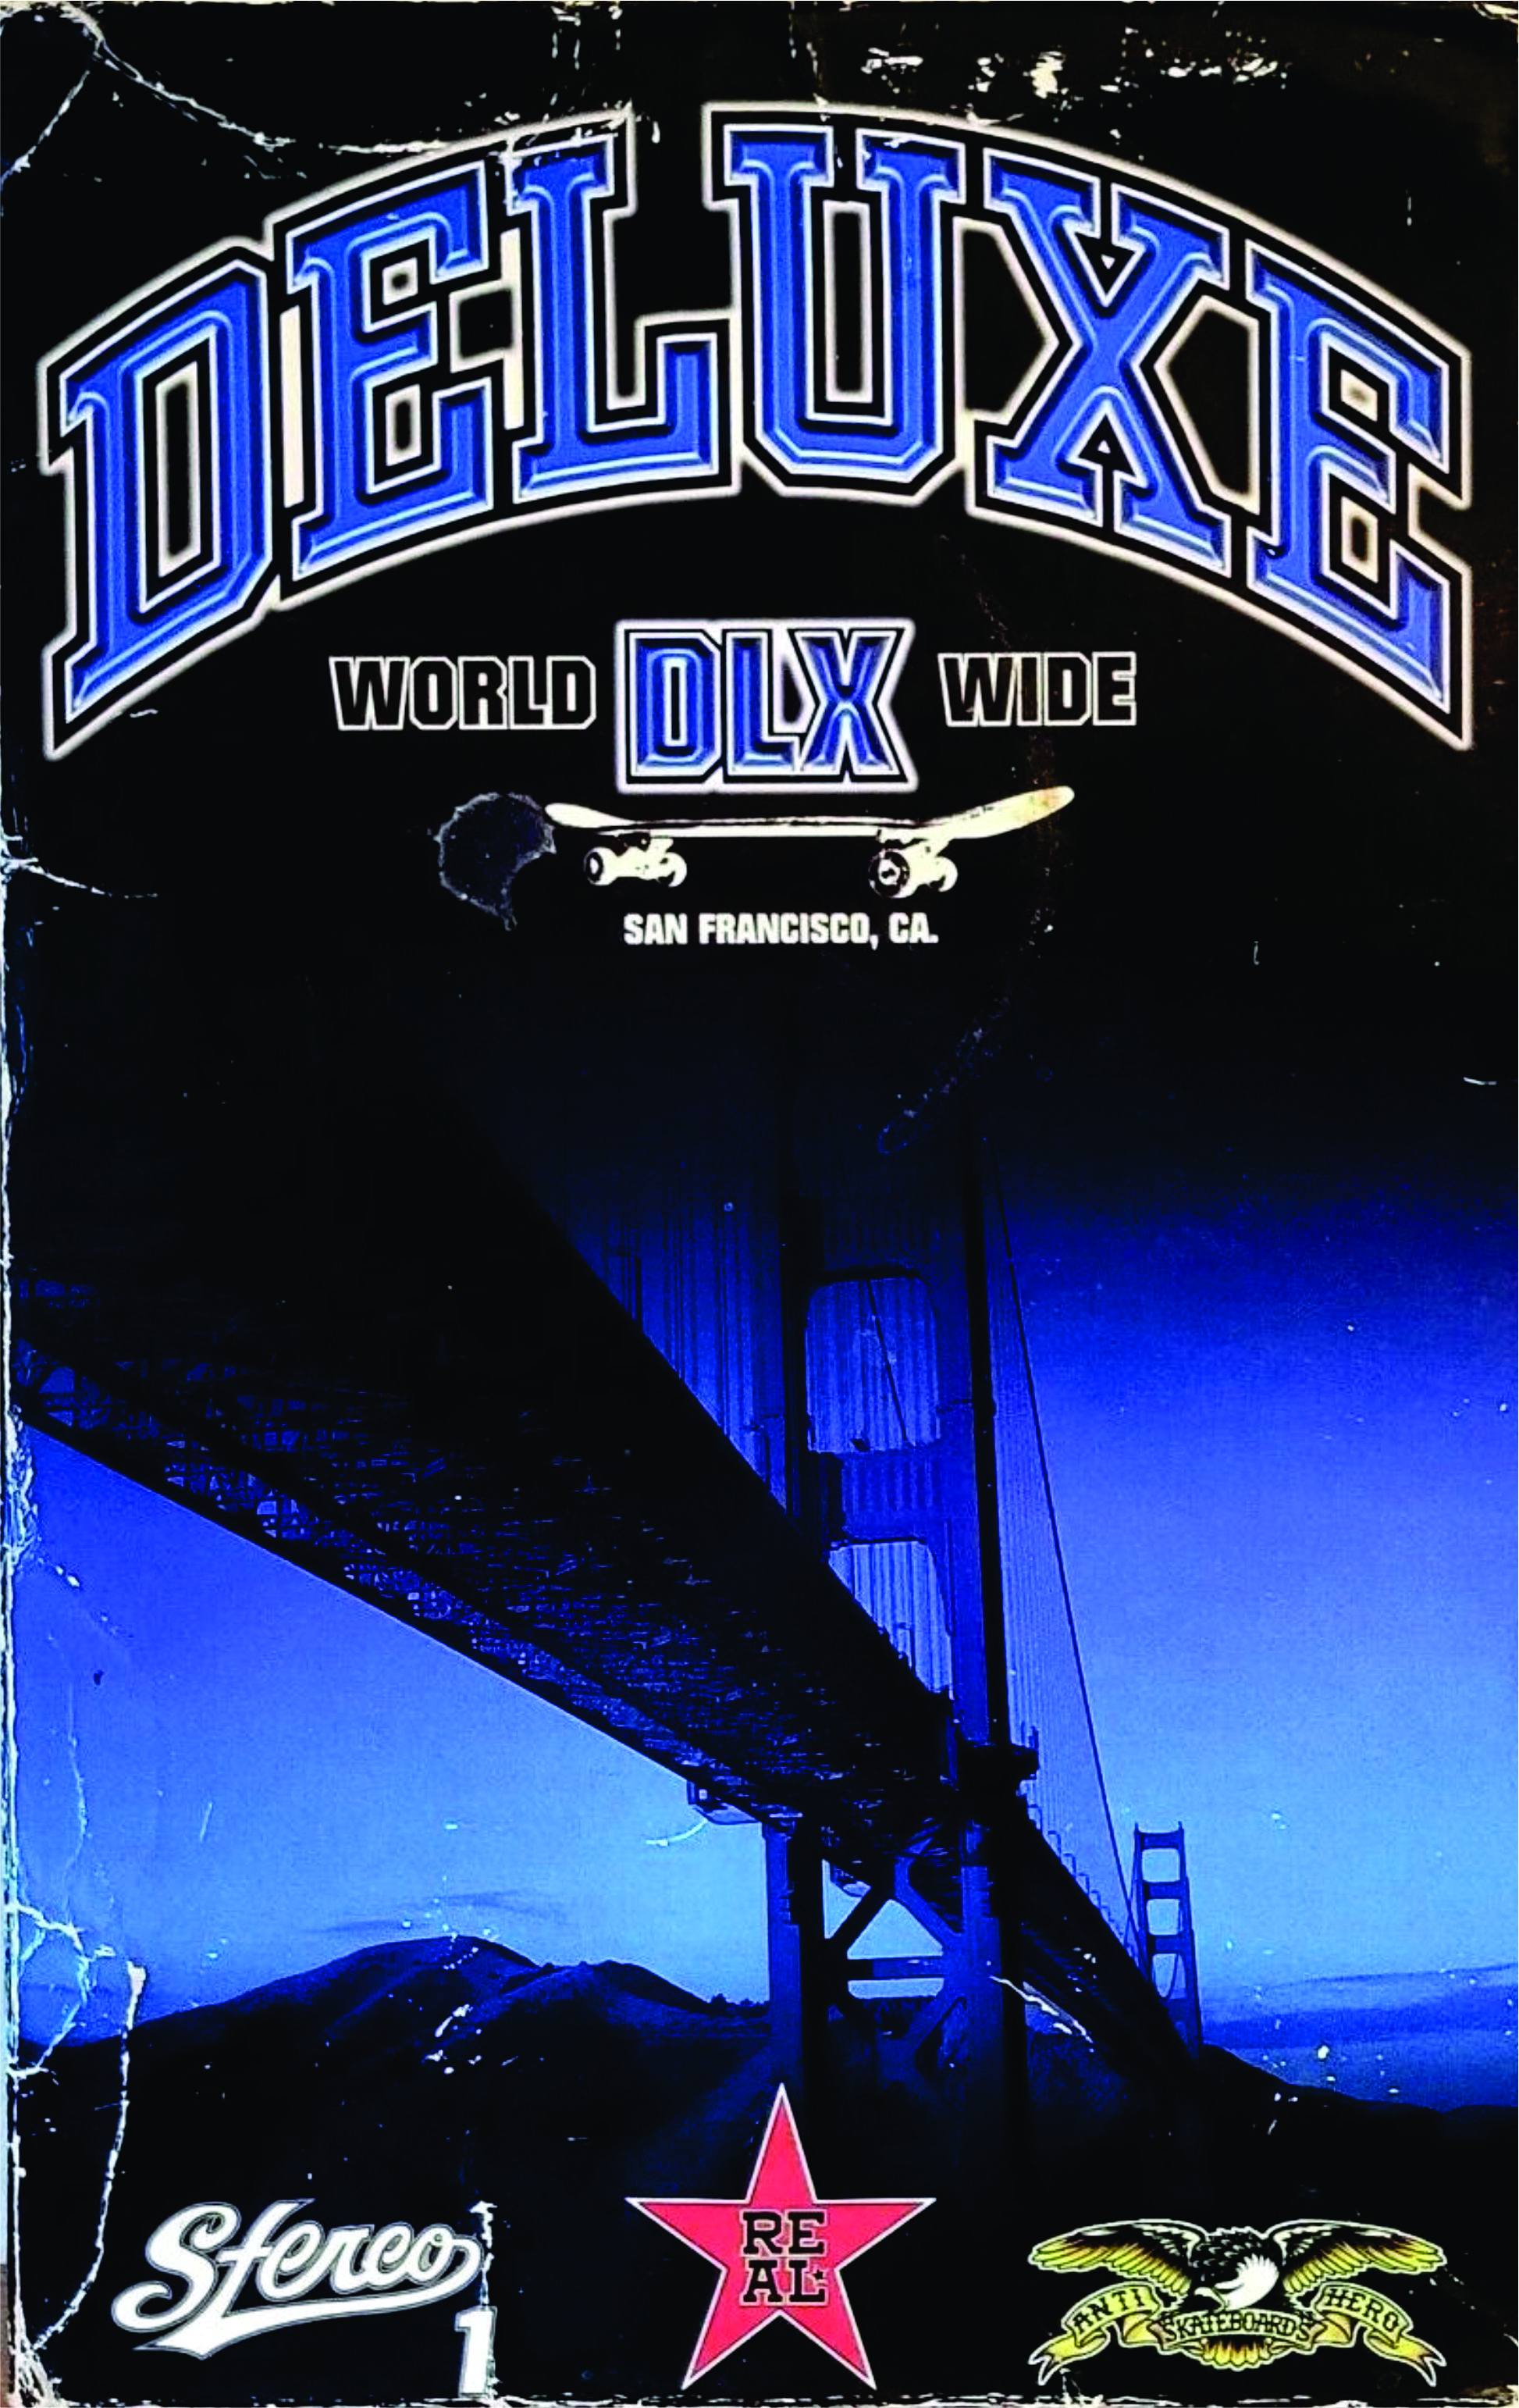 Deluxe - World Wide Distribution cover